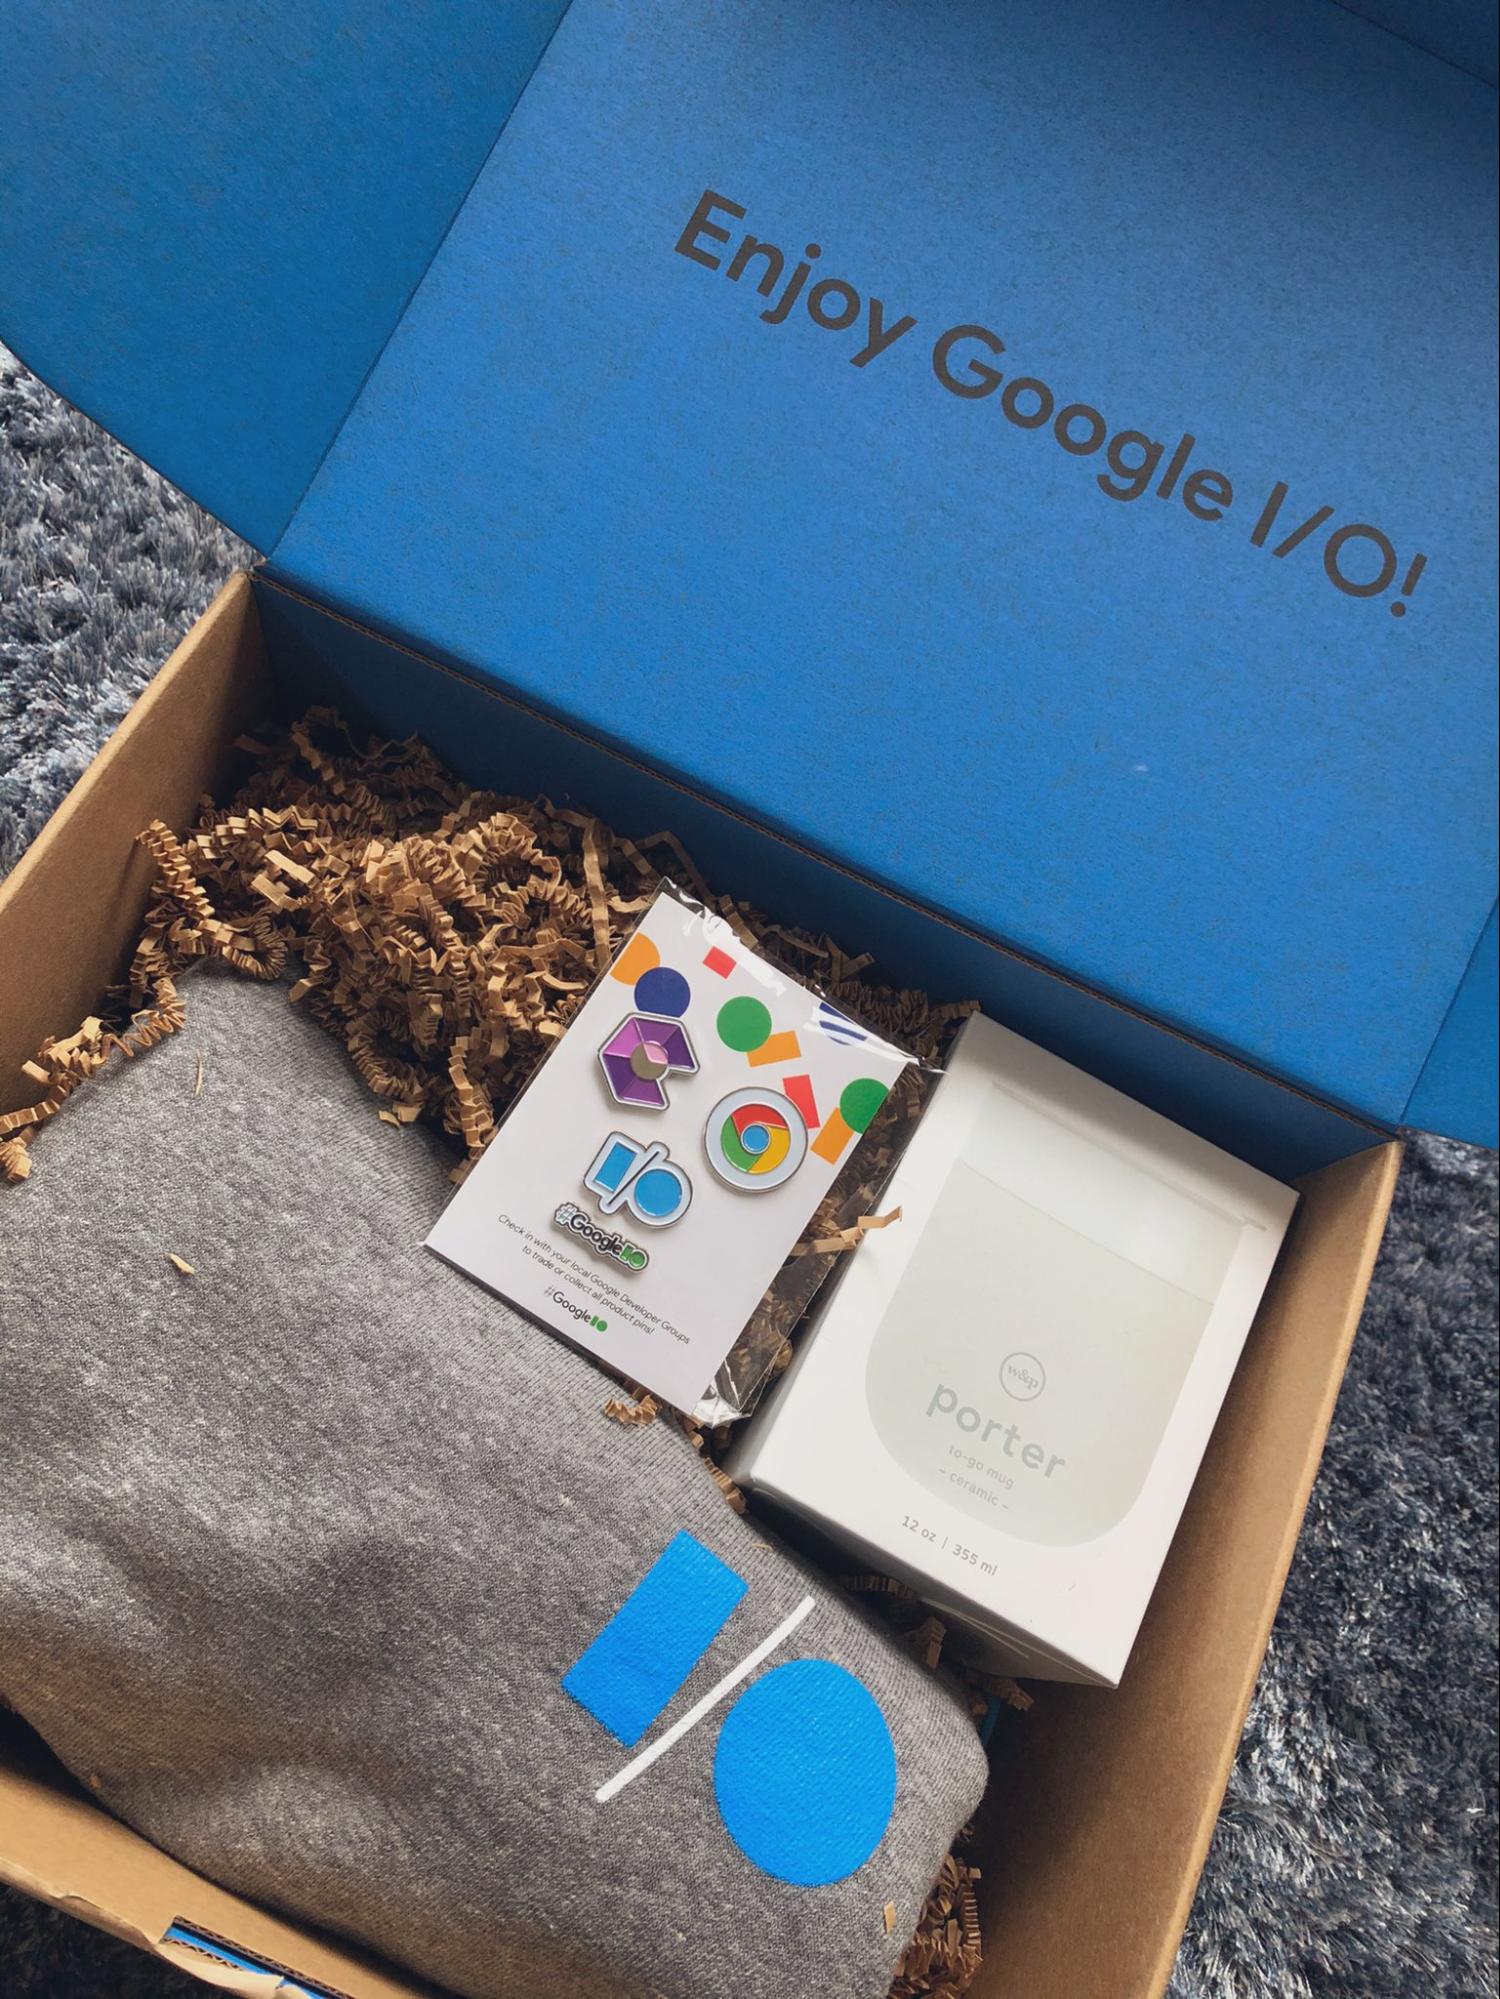 Branded Swag Box from Google